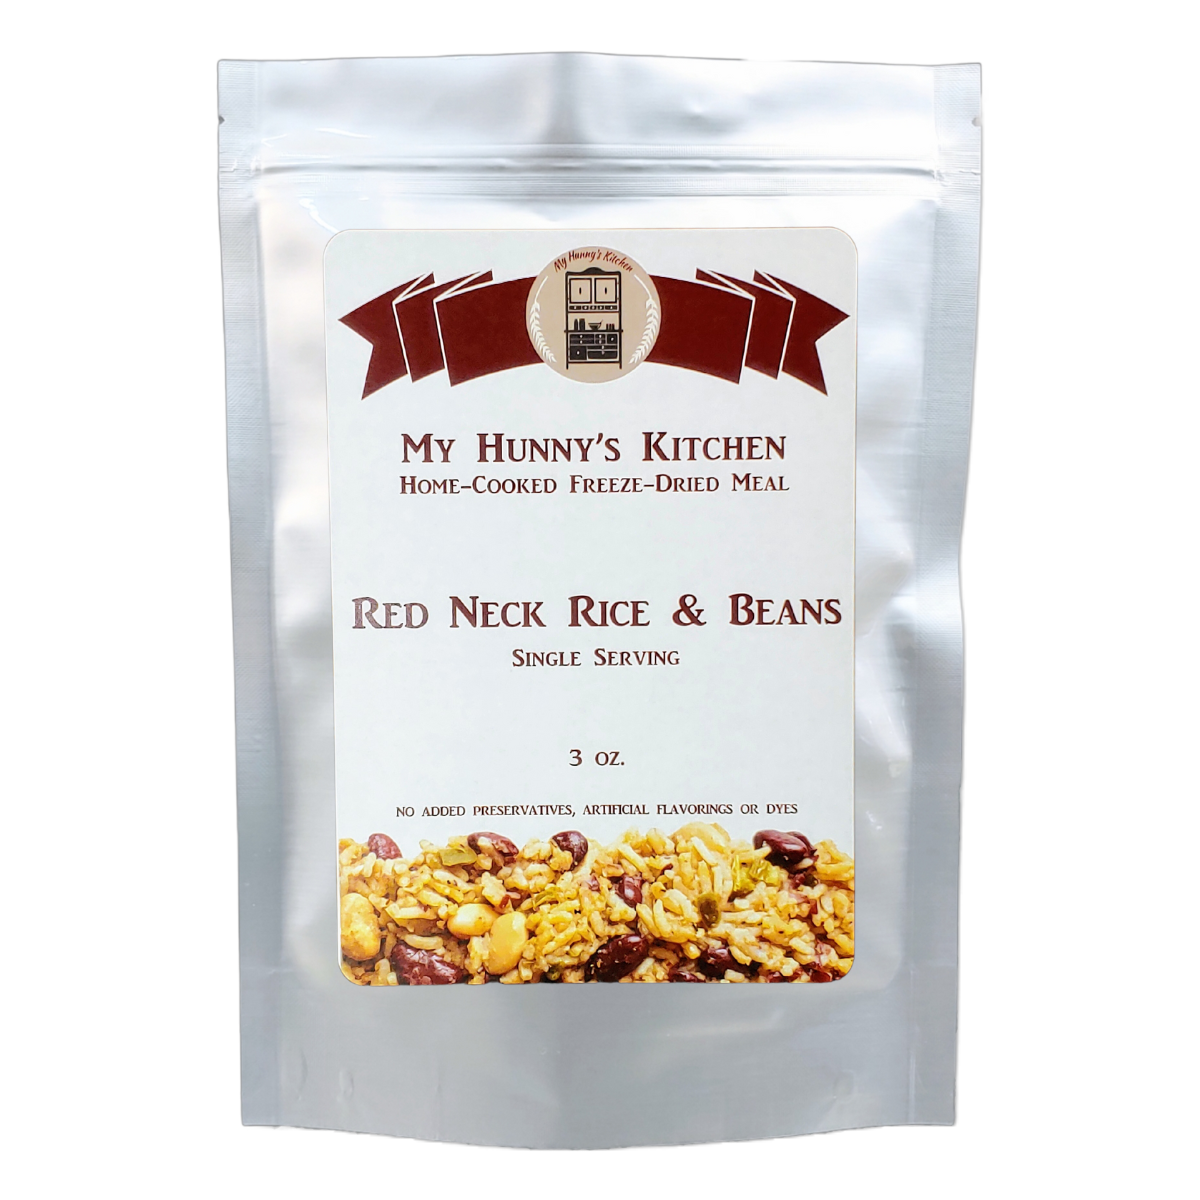 Redneck Rice and Beans Freeze Dried Meal packaging front view